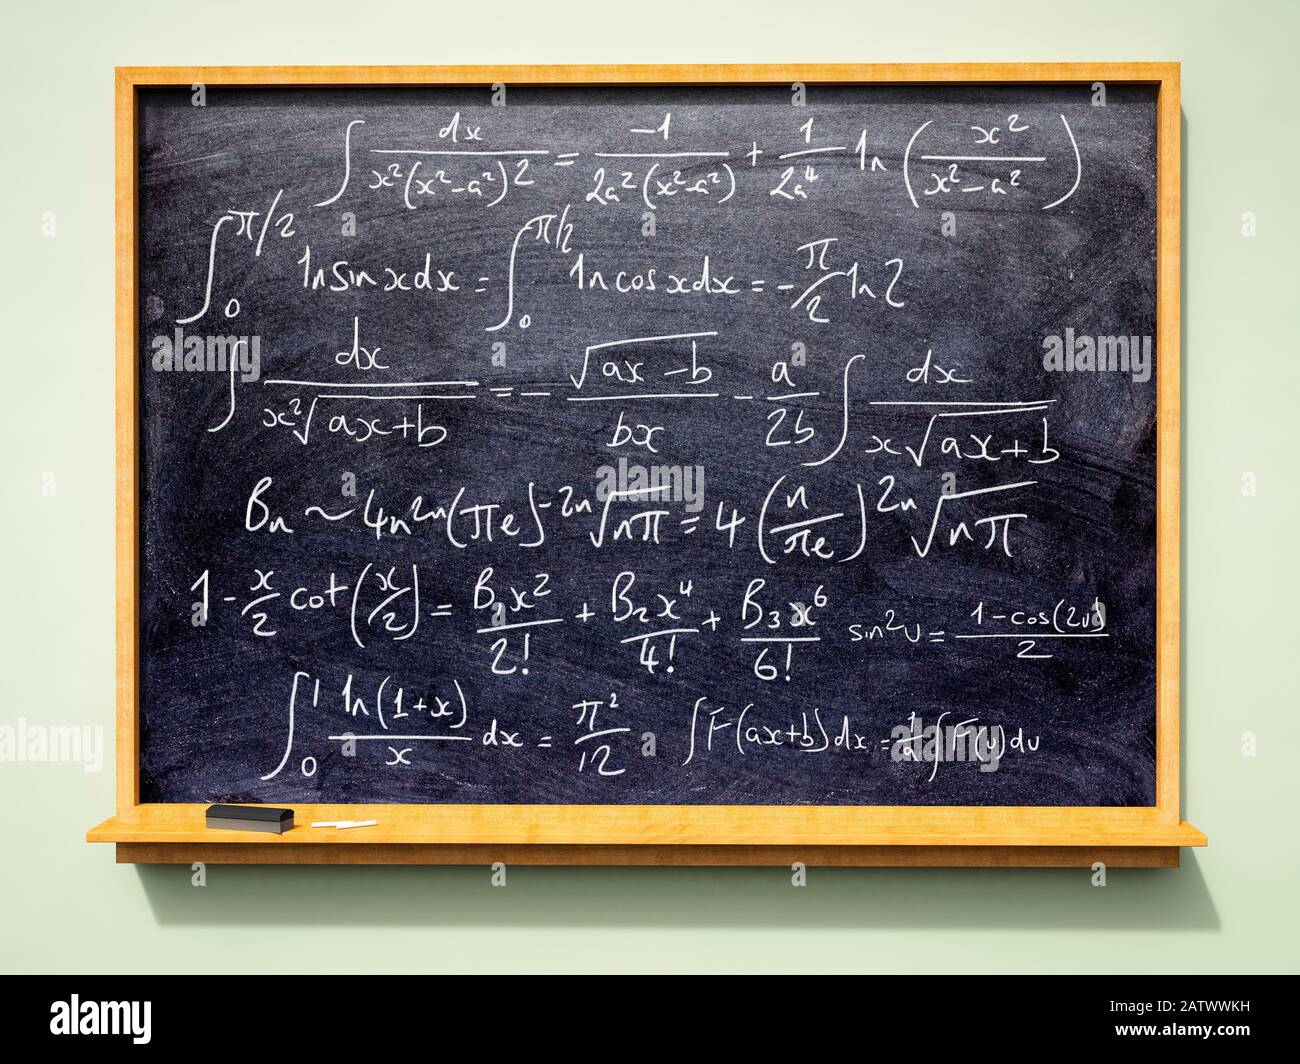 School or University blackboard with advanced mathematical formulas and equations (algebra) written on it Stock Photo